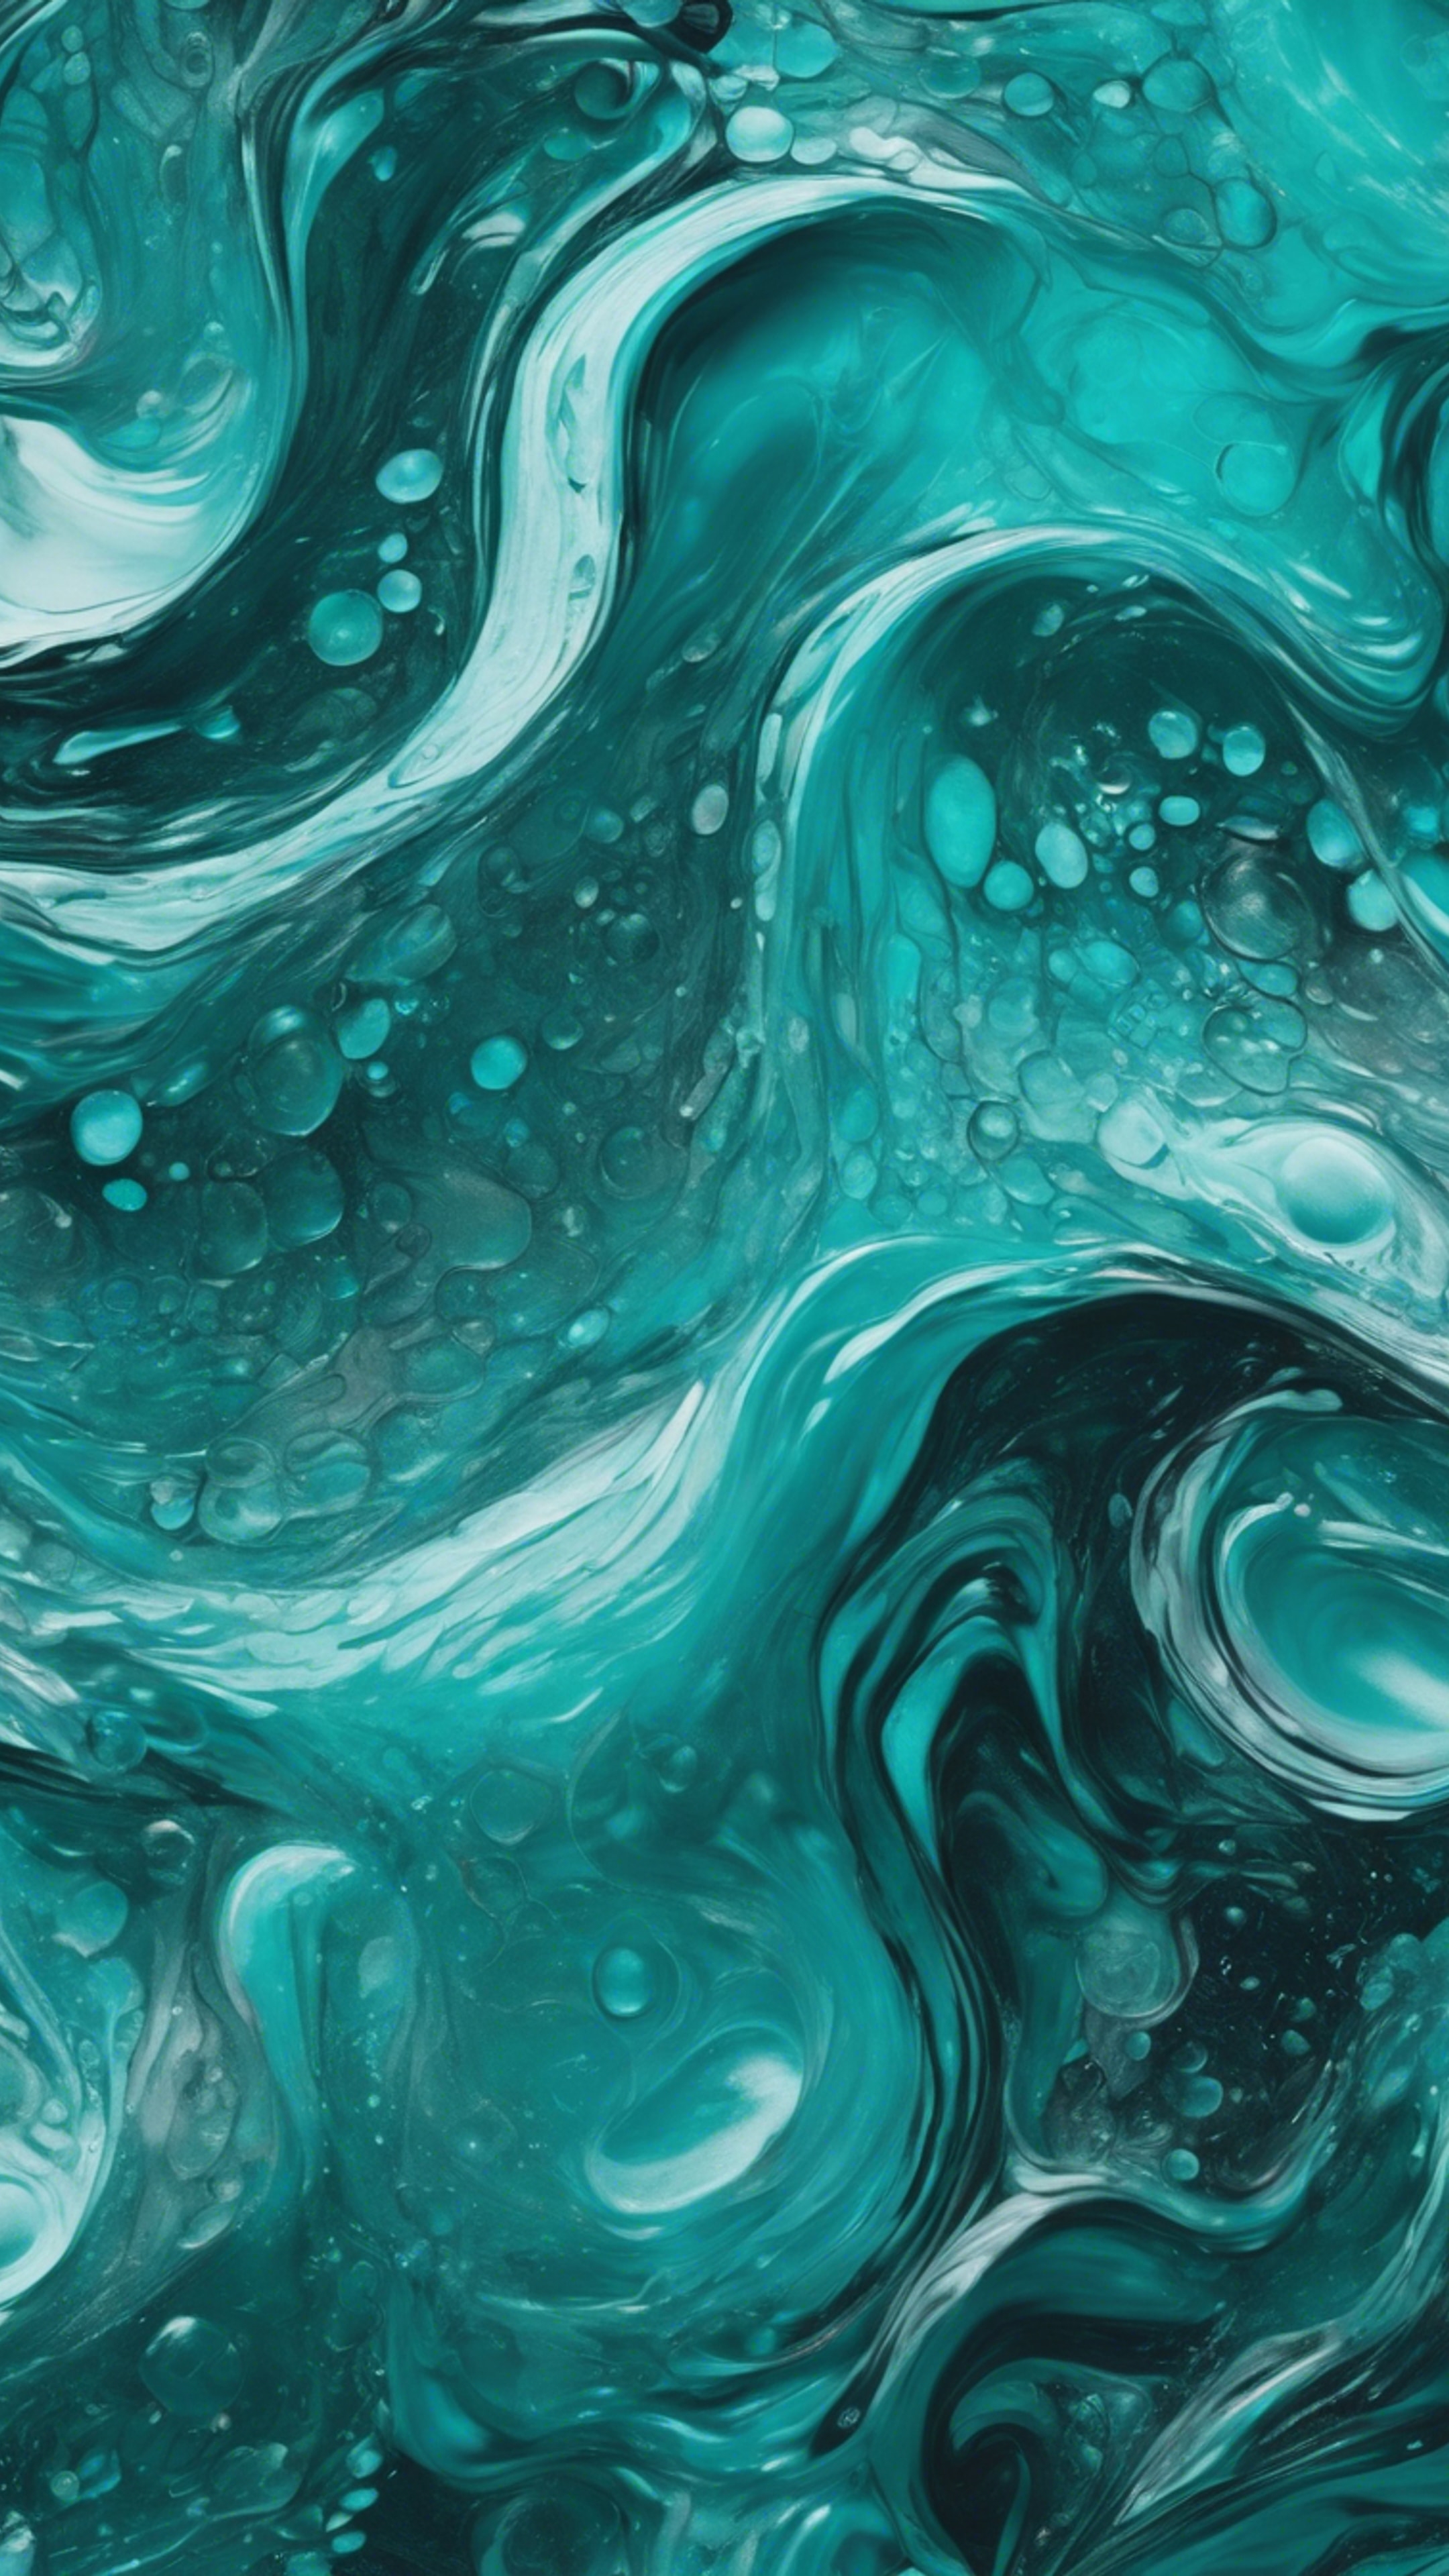 Abstract painting with swirling waves of shades of cool teal. Tapeta[053c1b1ade8044ef8a45]